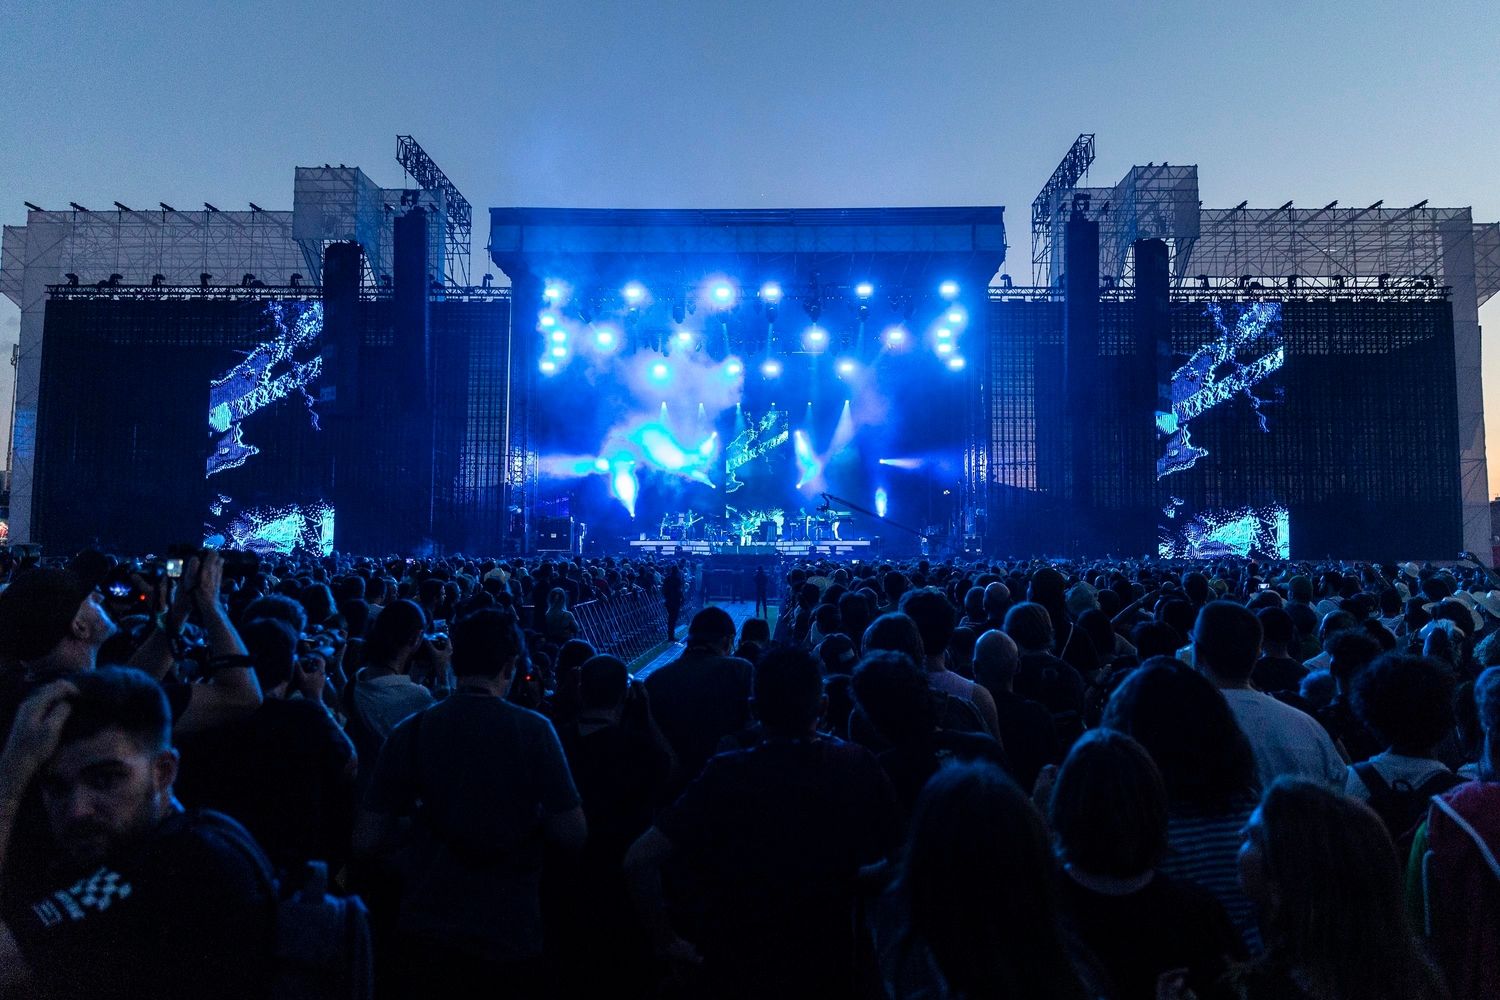 Want to perform at Mad Cool Festival this summer? Here’s how you can win the chance to play